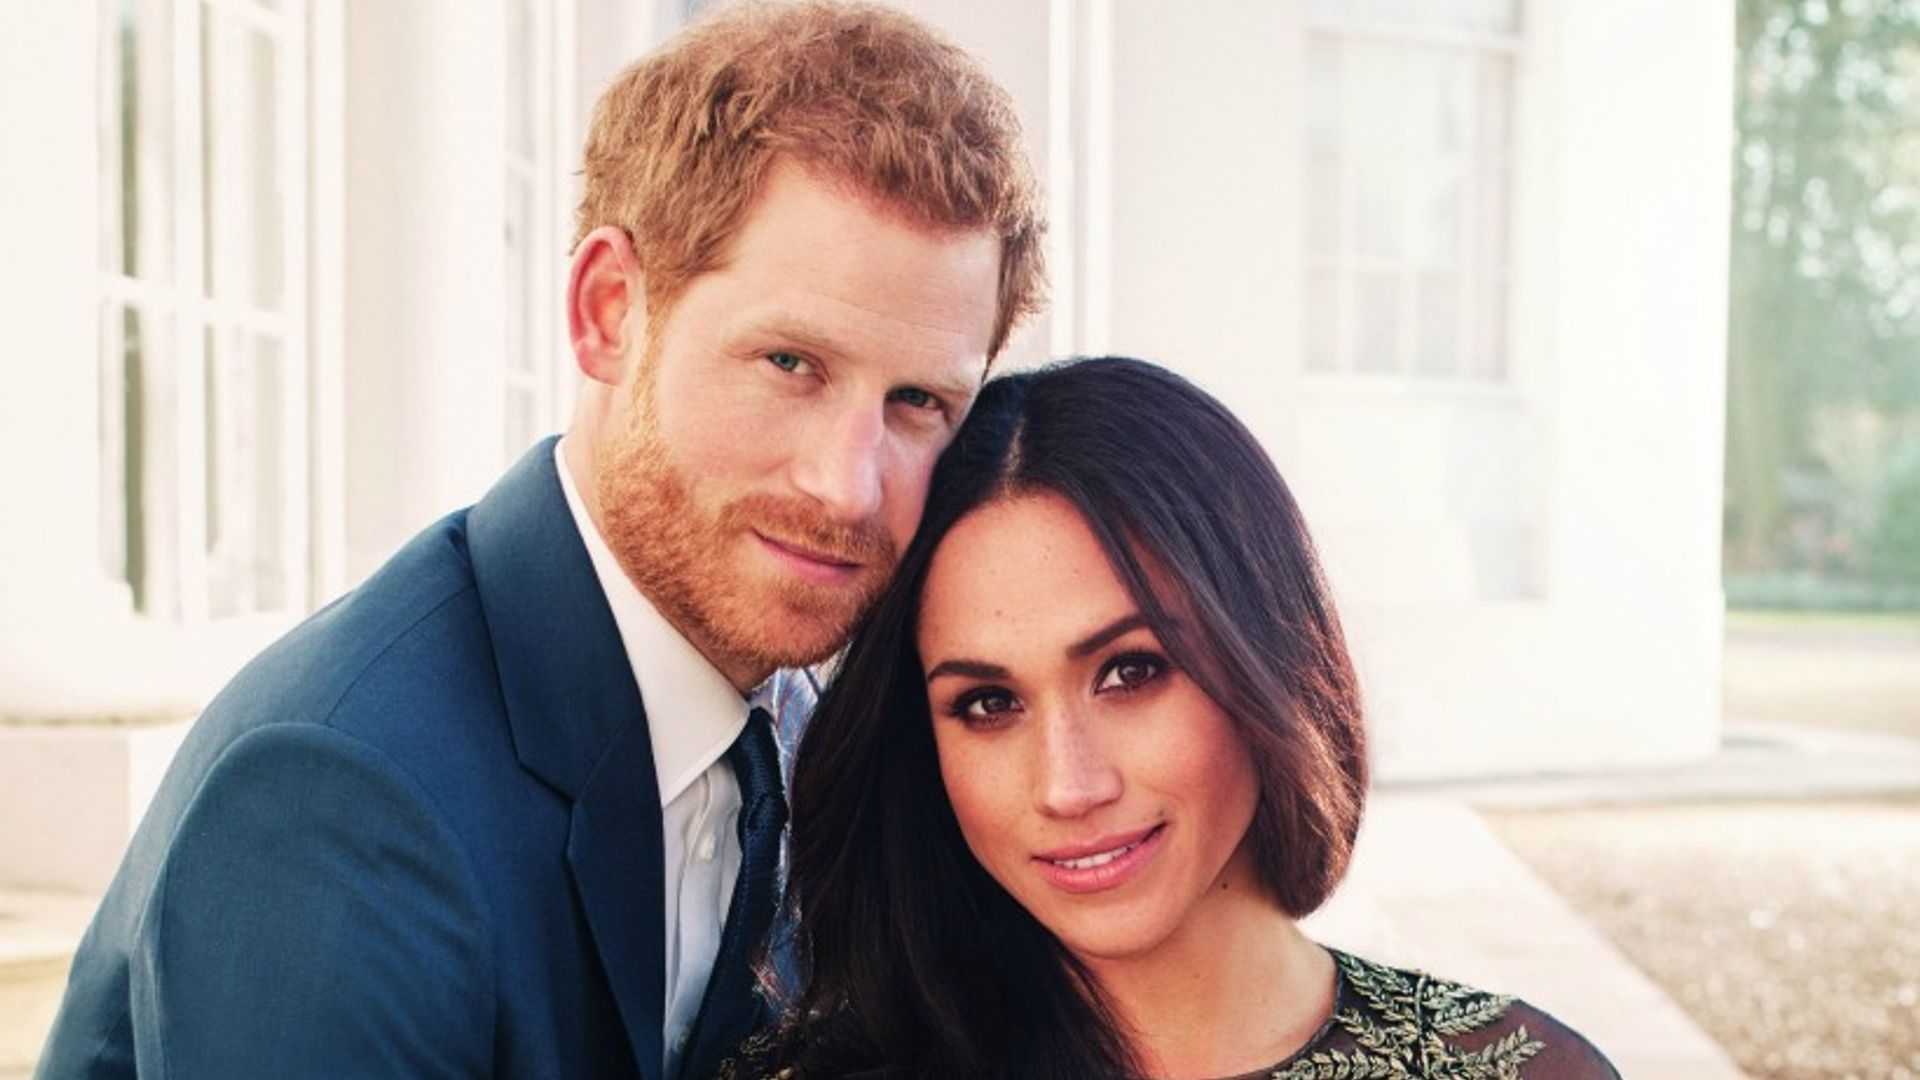 This is why you'll be able to watch the royal wedding ANYWHERE in the UK